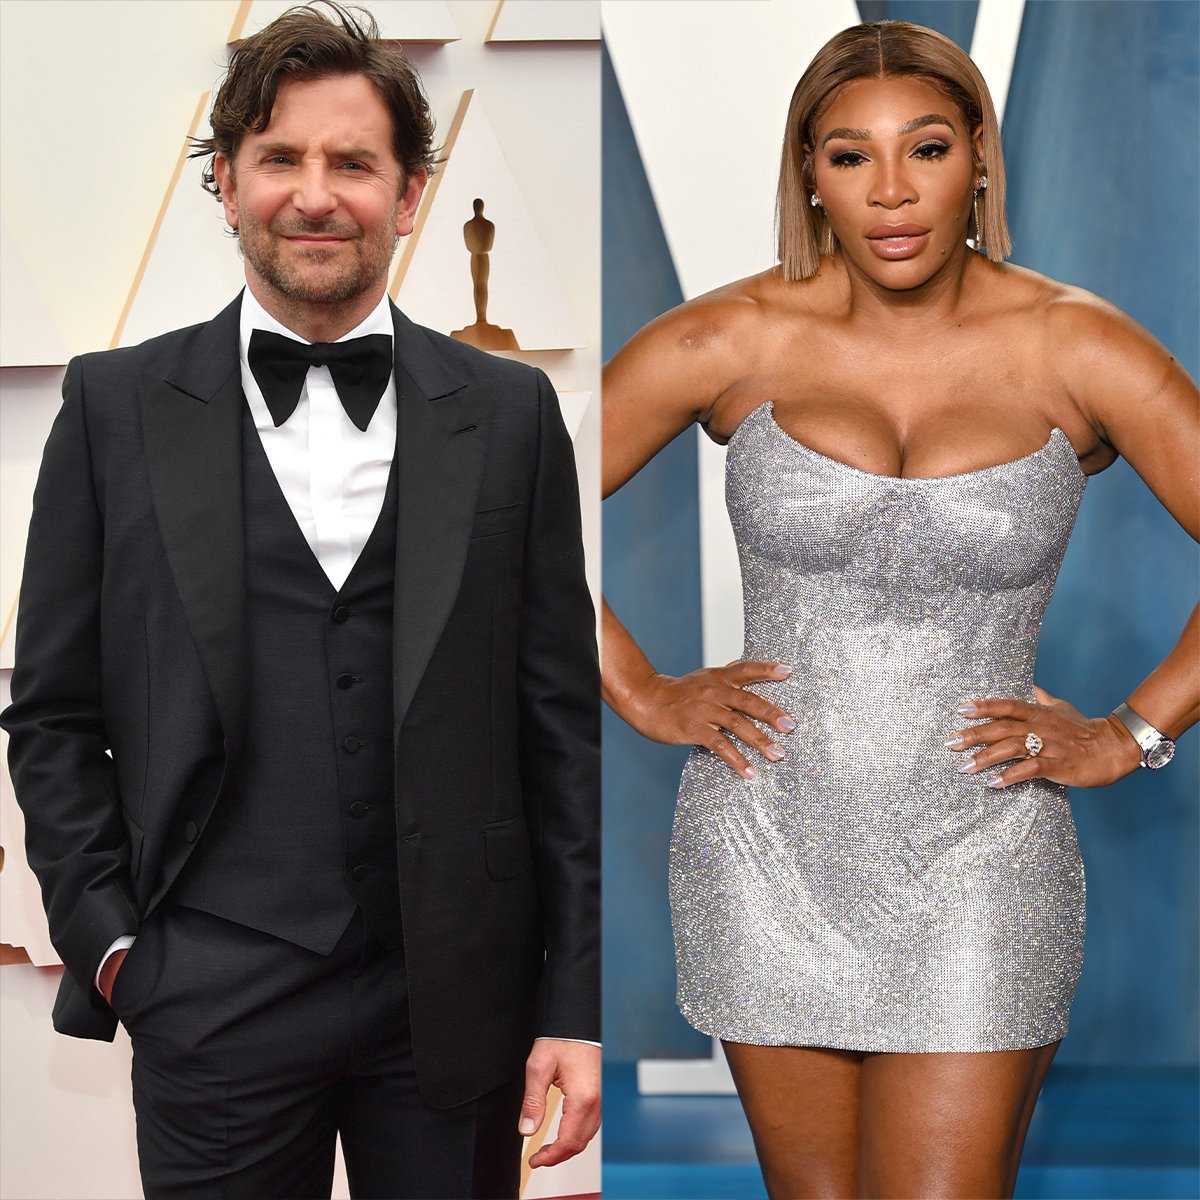 Serena Williams Tells Bradley Cooper She Can “Come Back to Tennis”